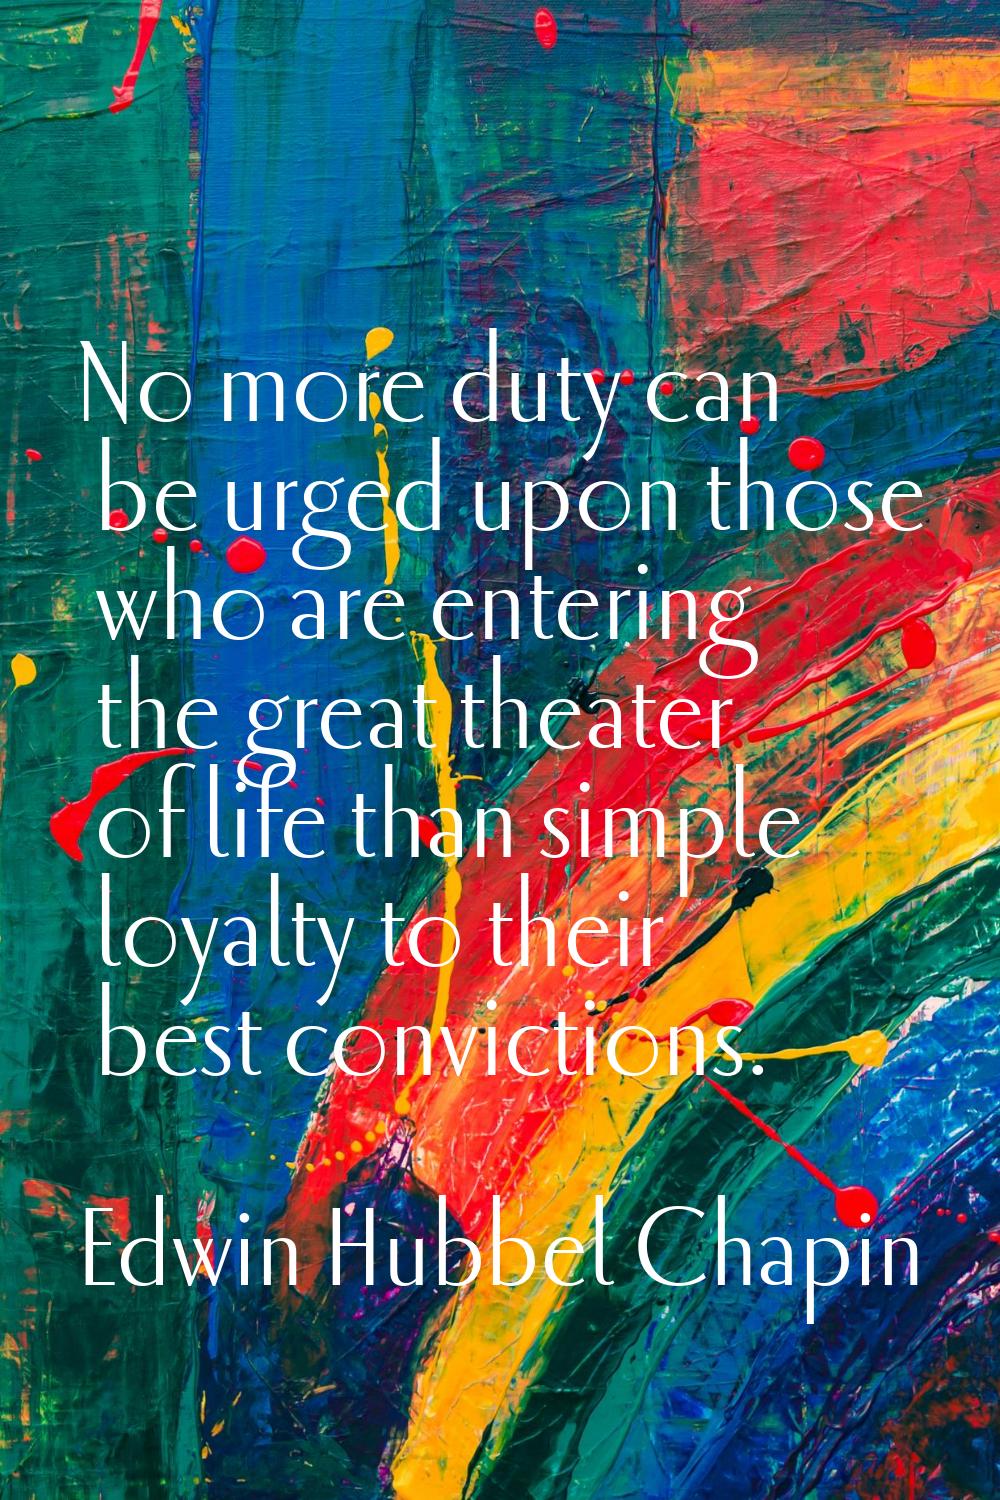 No more duty can be urged upon those who are entering the great theater of life than simple loyalty